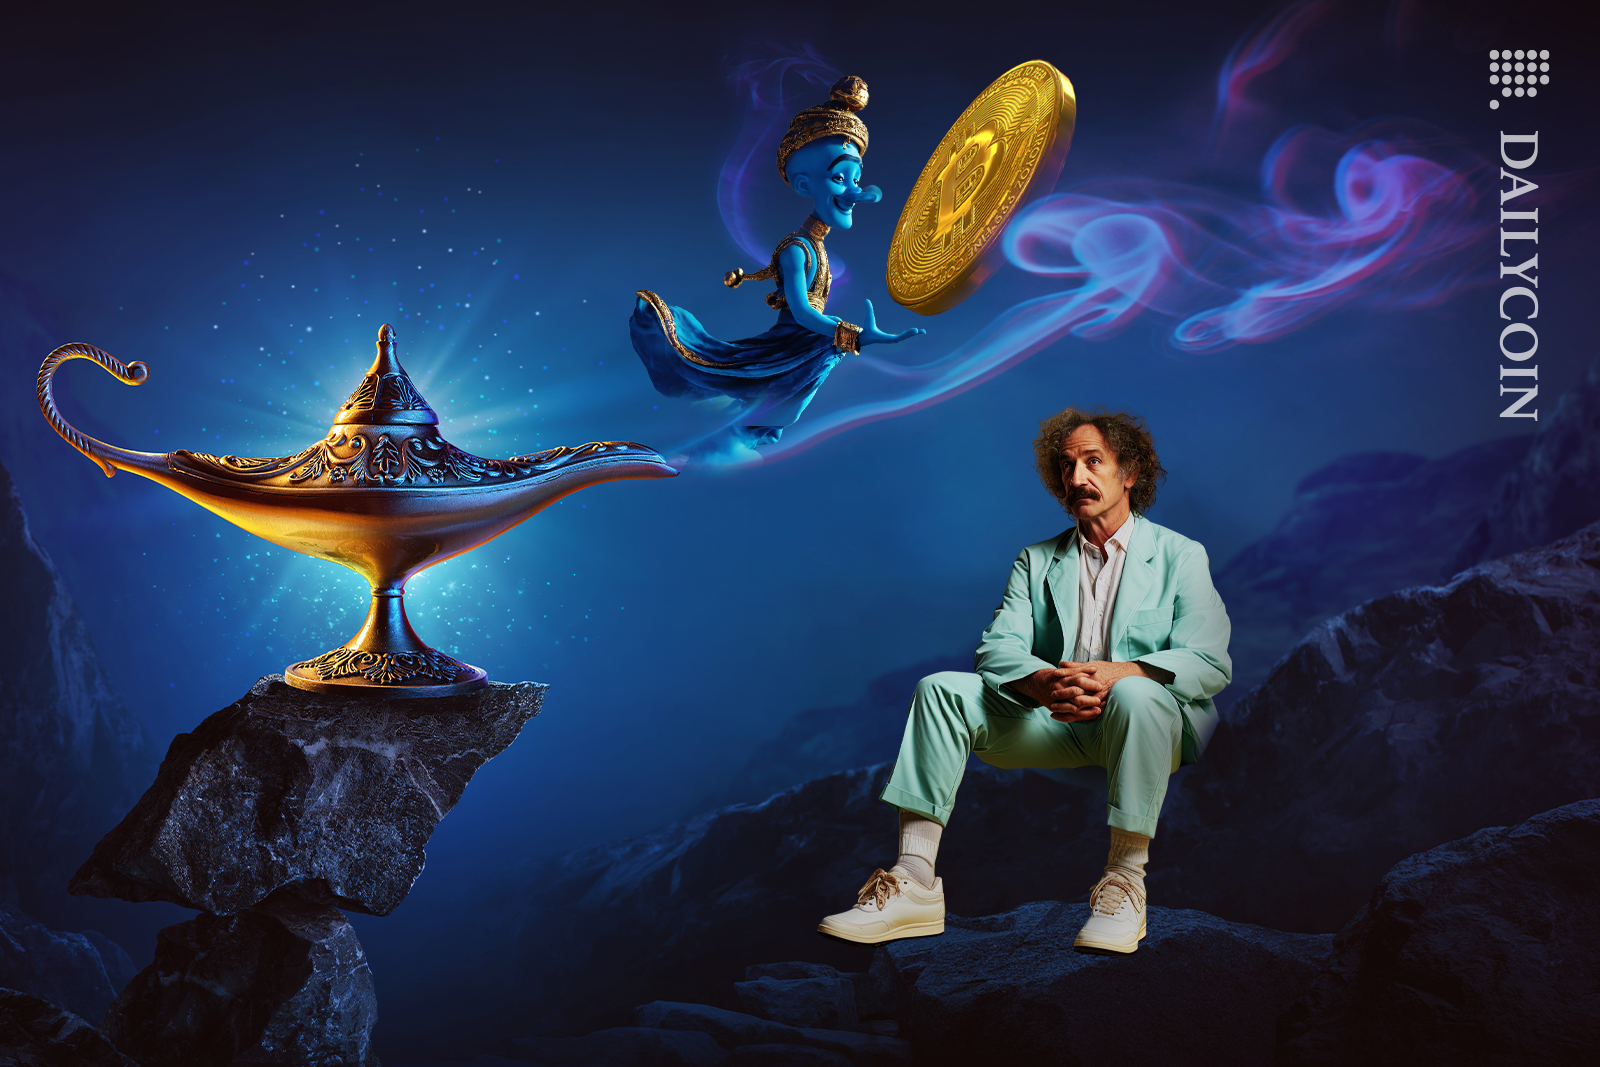 Guy made a wish with a Genie for bitcoin.